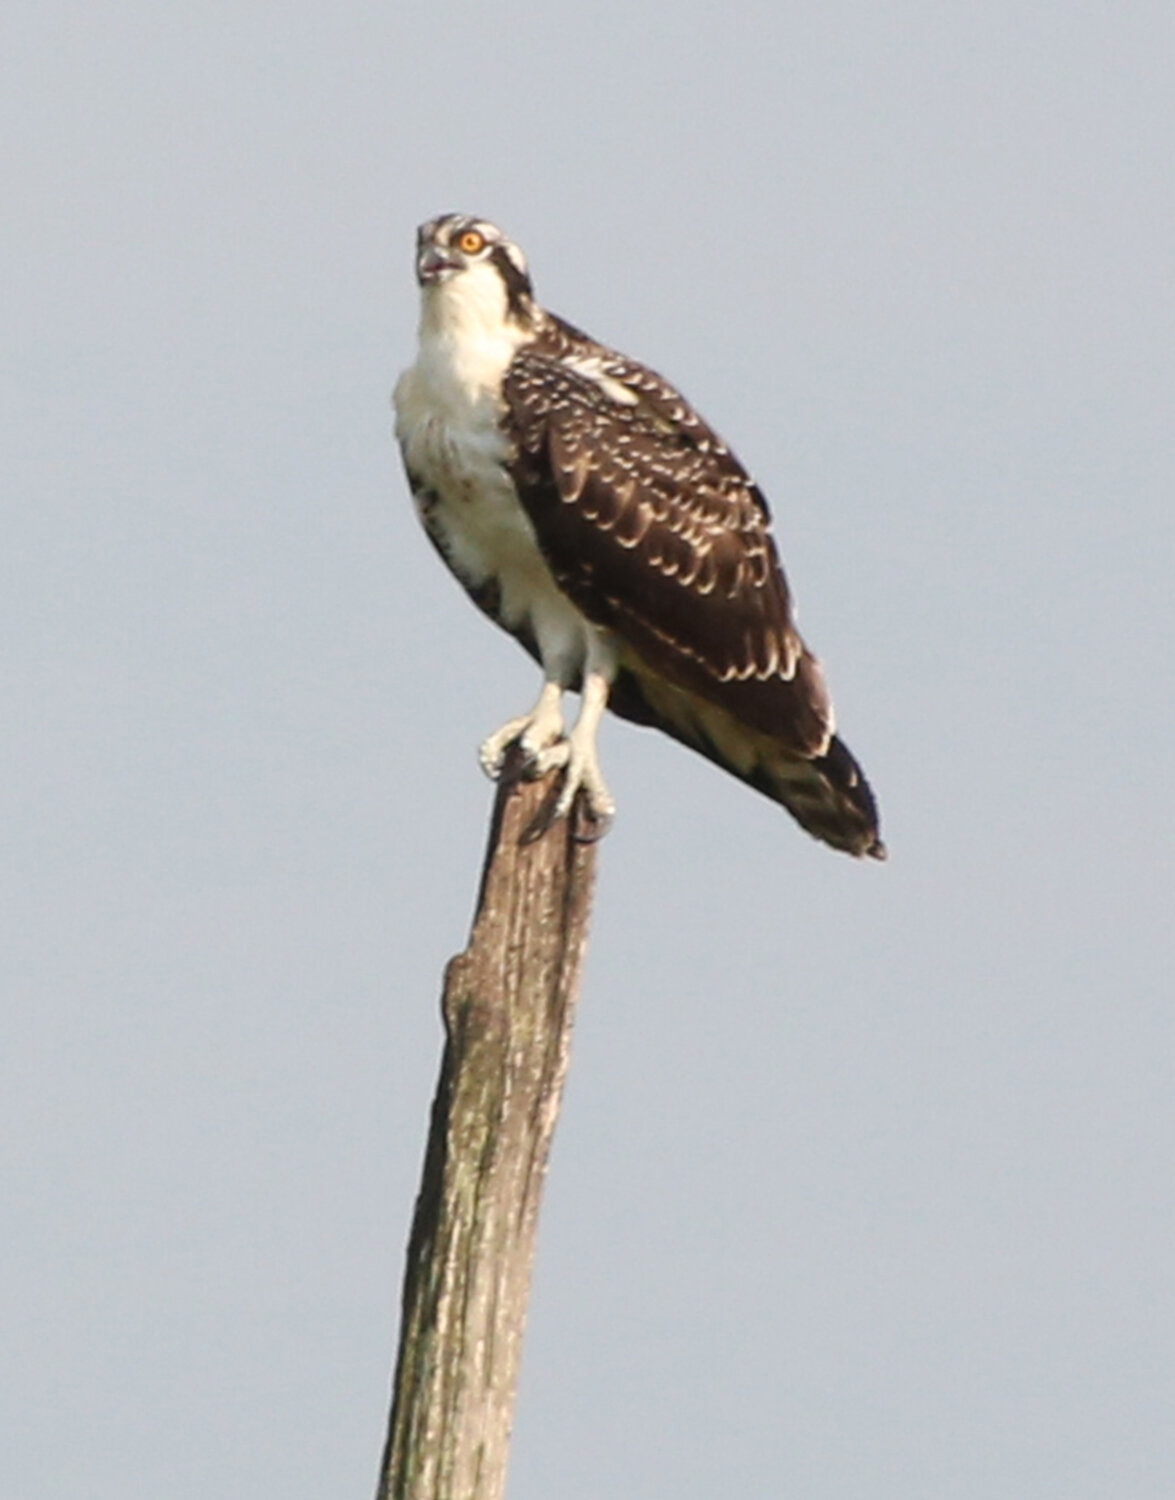 From a dead treetop, an osprey studies the waters around the Blackwater National Wildlife Refuge in Dorchester County, Maryland.